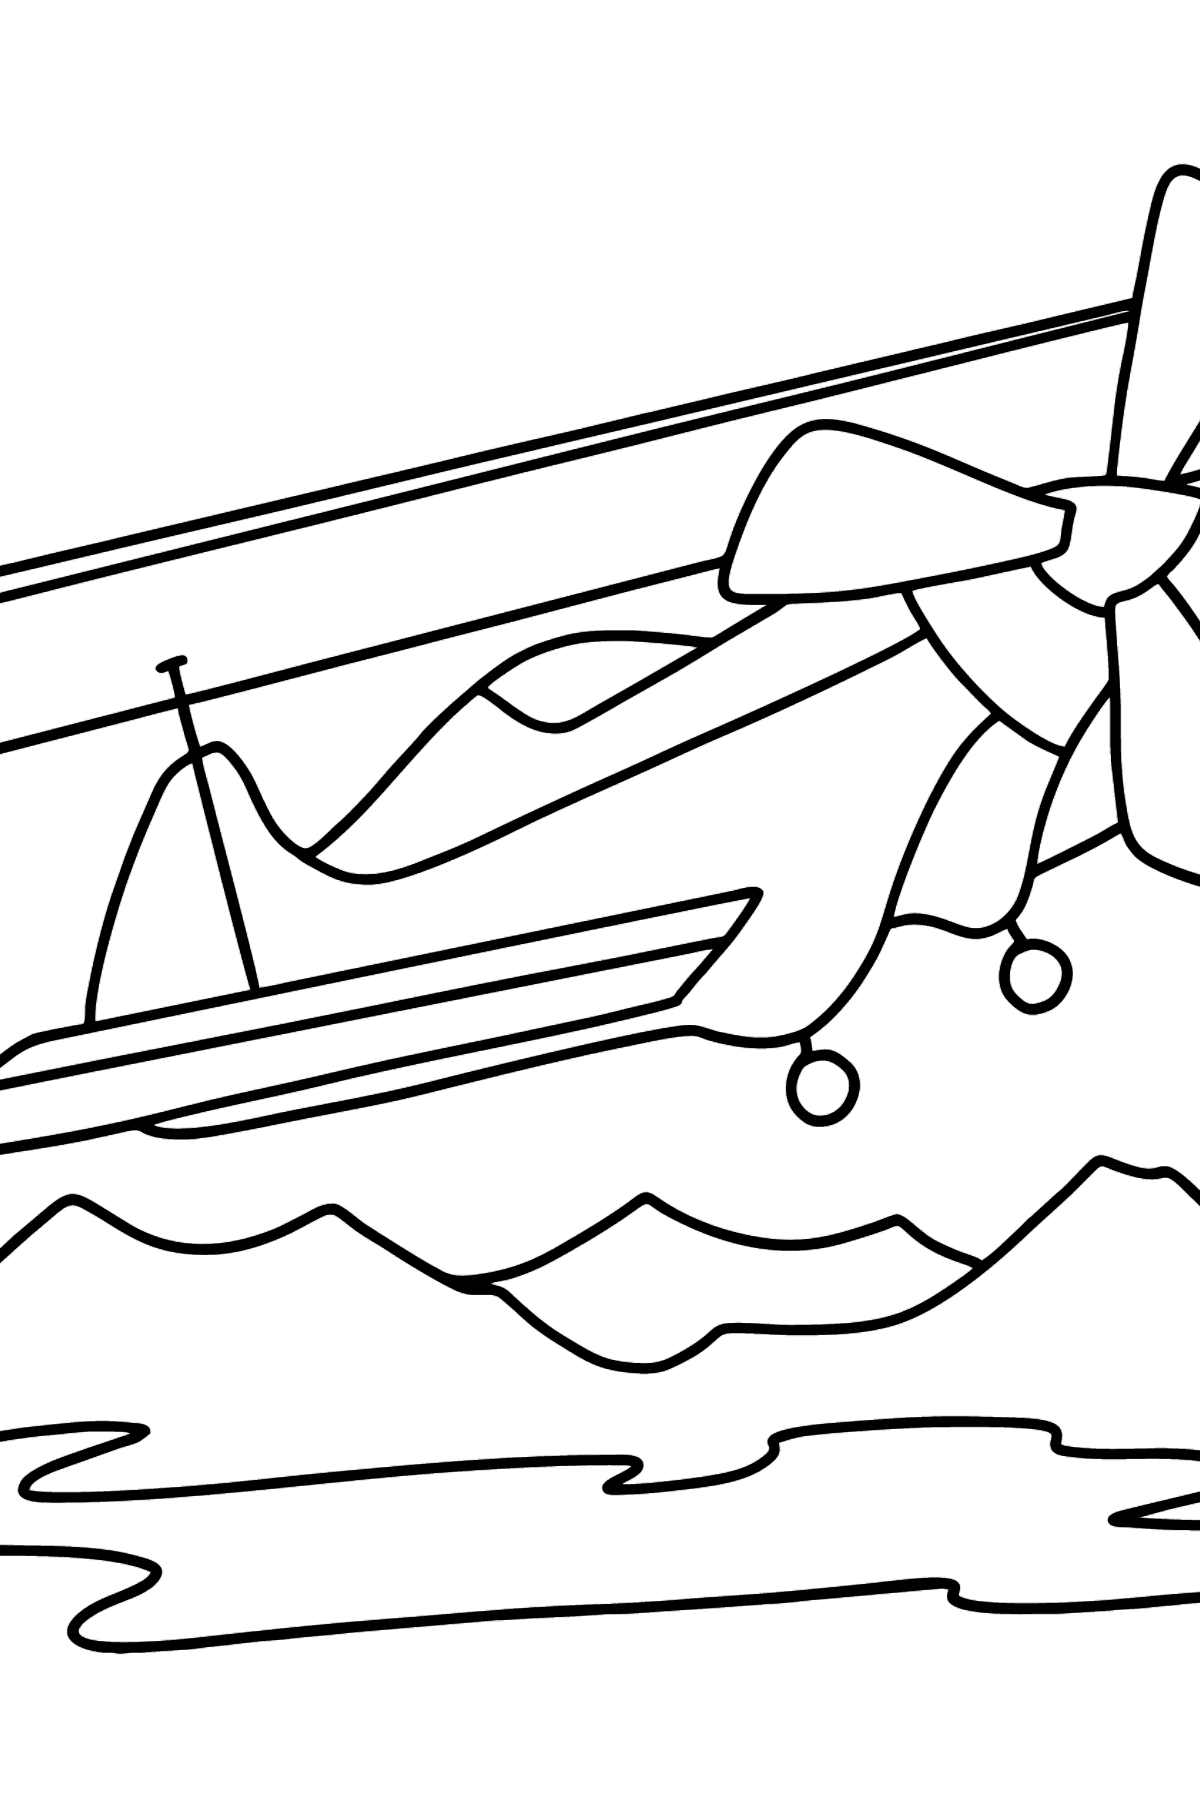 Coloring page - Light Airplane flies Over Mountains - Coloring Pages for Kids